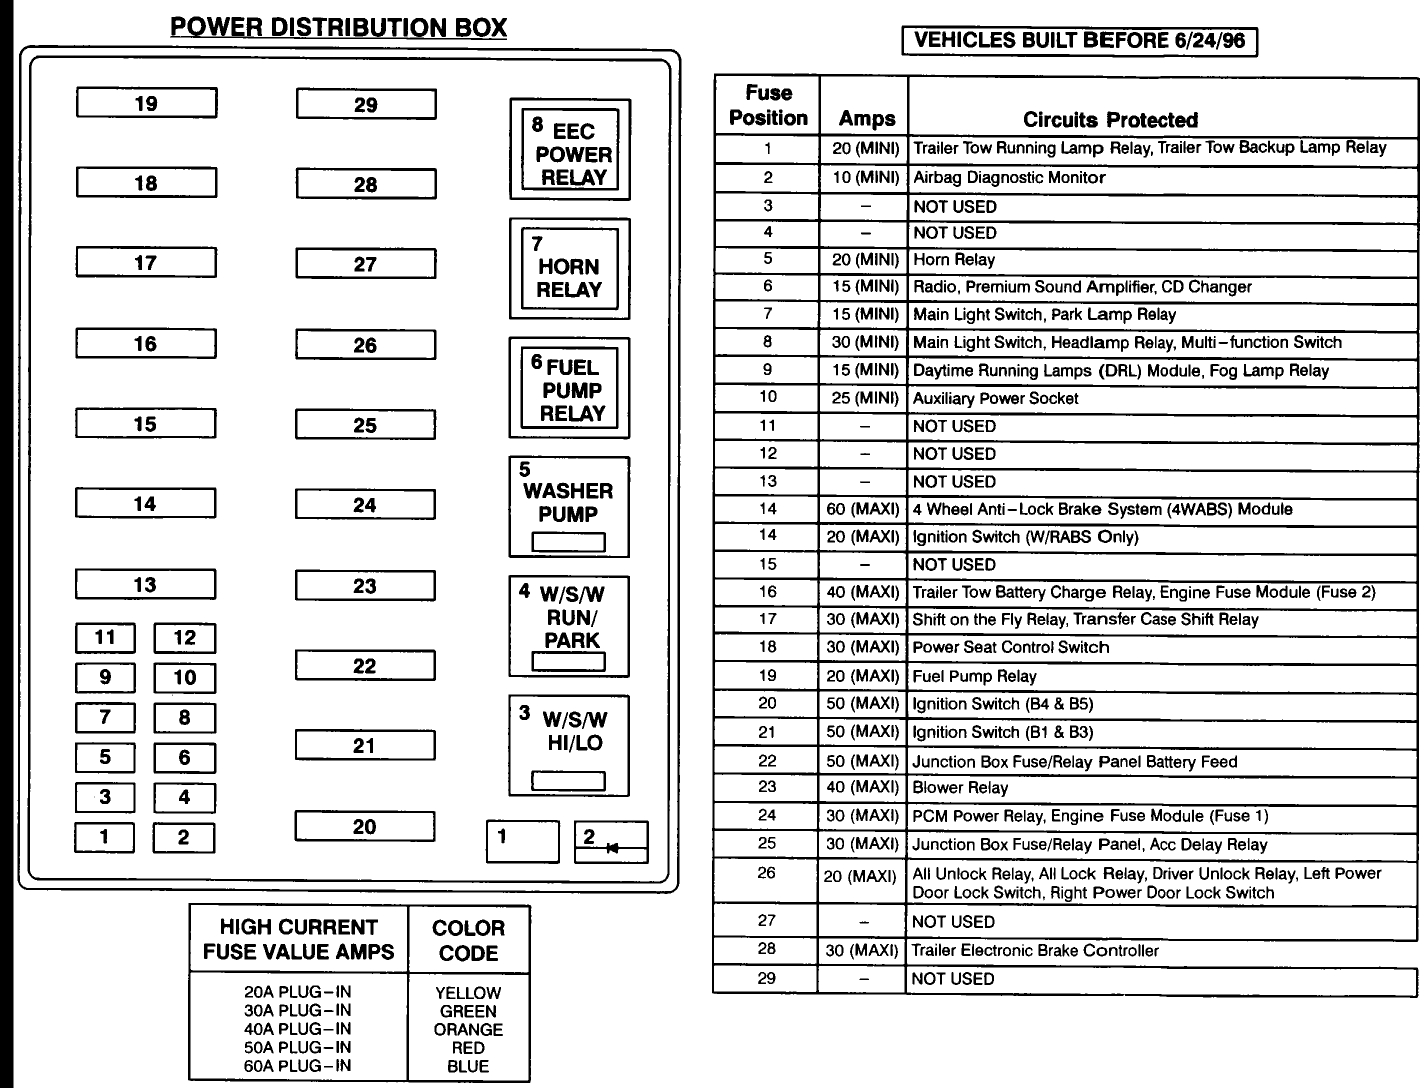 2007 Ford F150 Fuse Box Diagram Fuse Diagram For 2007 Ford F150 Wiring Diagram Content